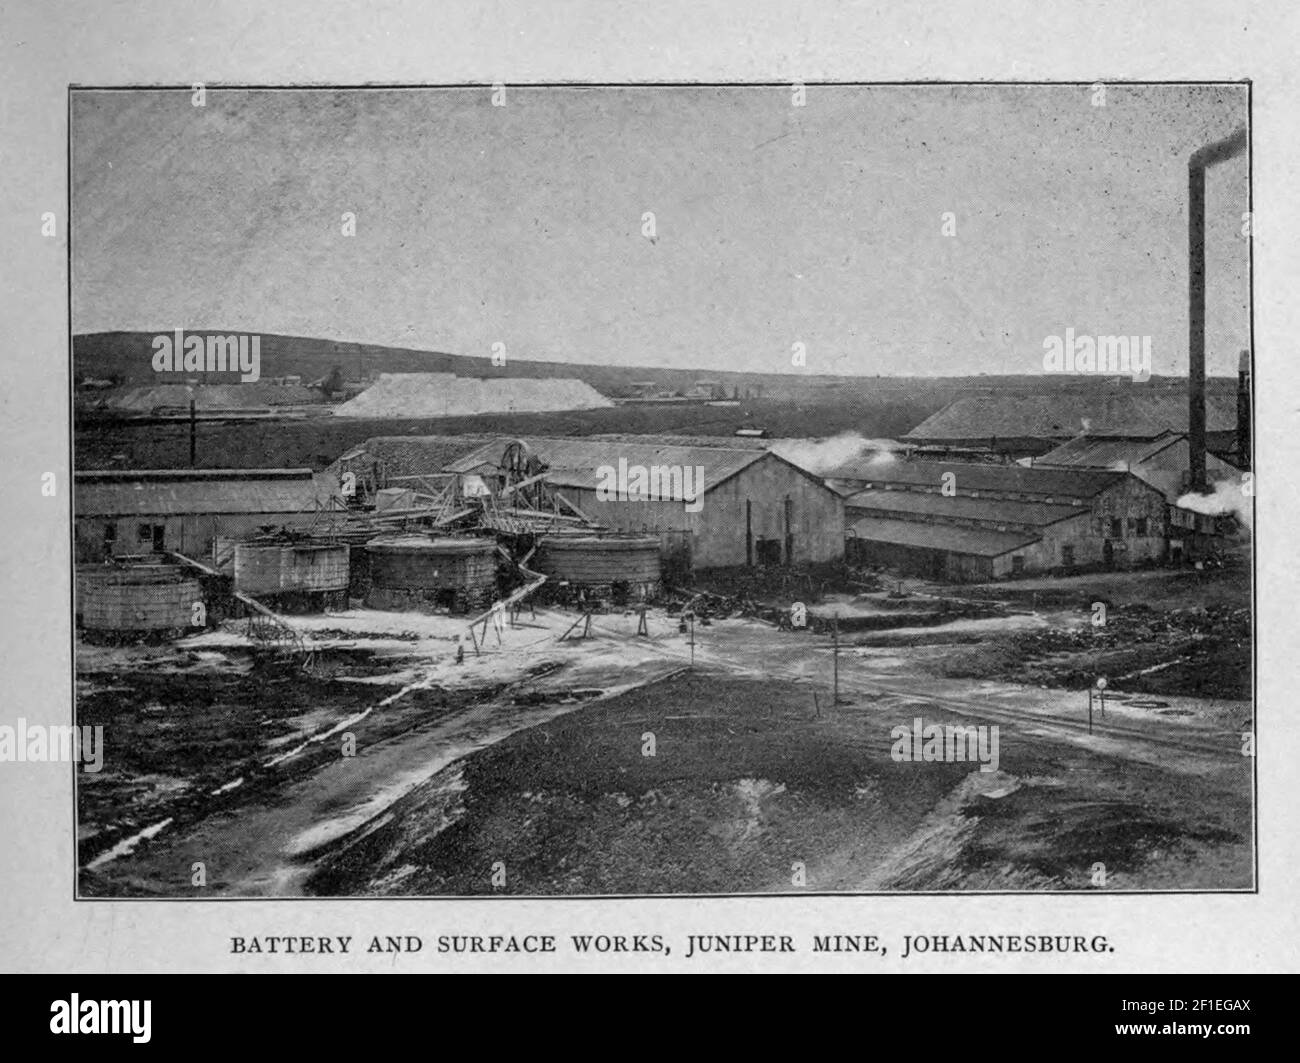 Battery and Surface works, Juniper Mine, Johannesburg from the book ' Boer and Britisher in South Africa; a history of the Boer-British war and the wars for United South Africa, together with biographies of the great men who made the history of South Africa ' By Neville, John Ormond Published by Thompson & Thomas, Chicago, USA in 1900 Stock Photo